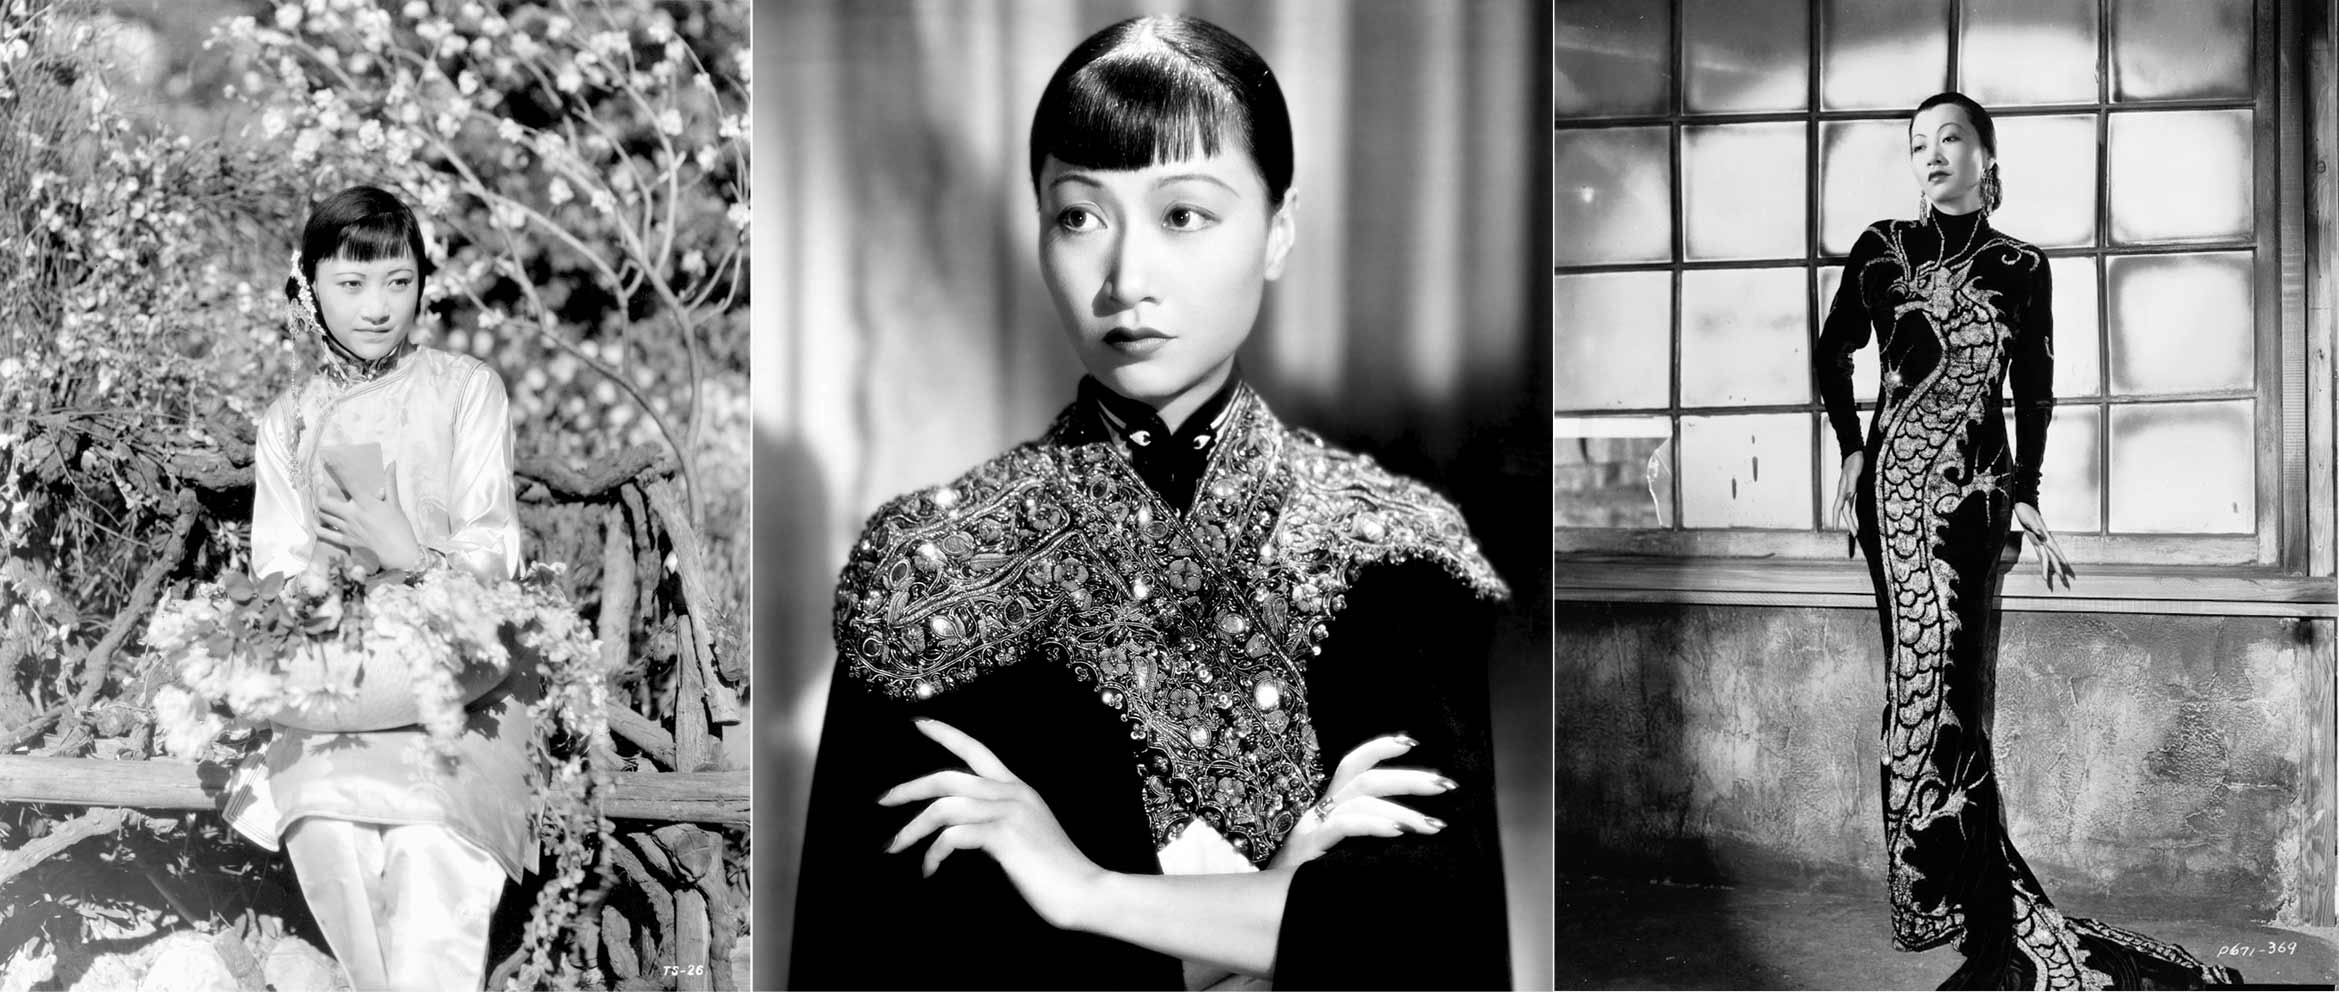 Anna May Wong triptych